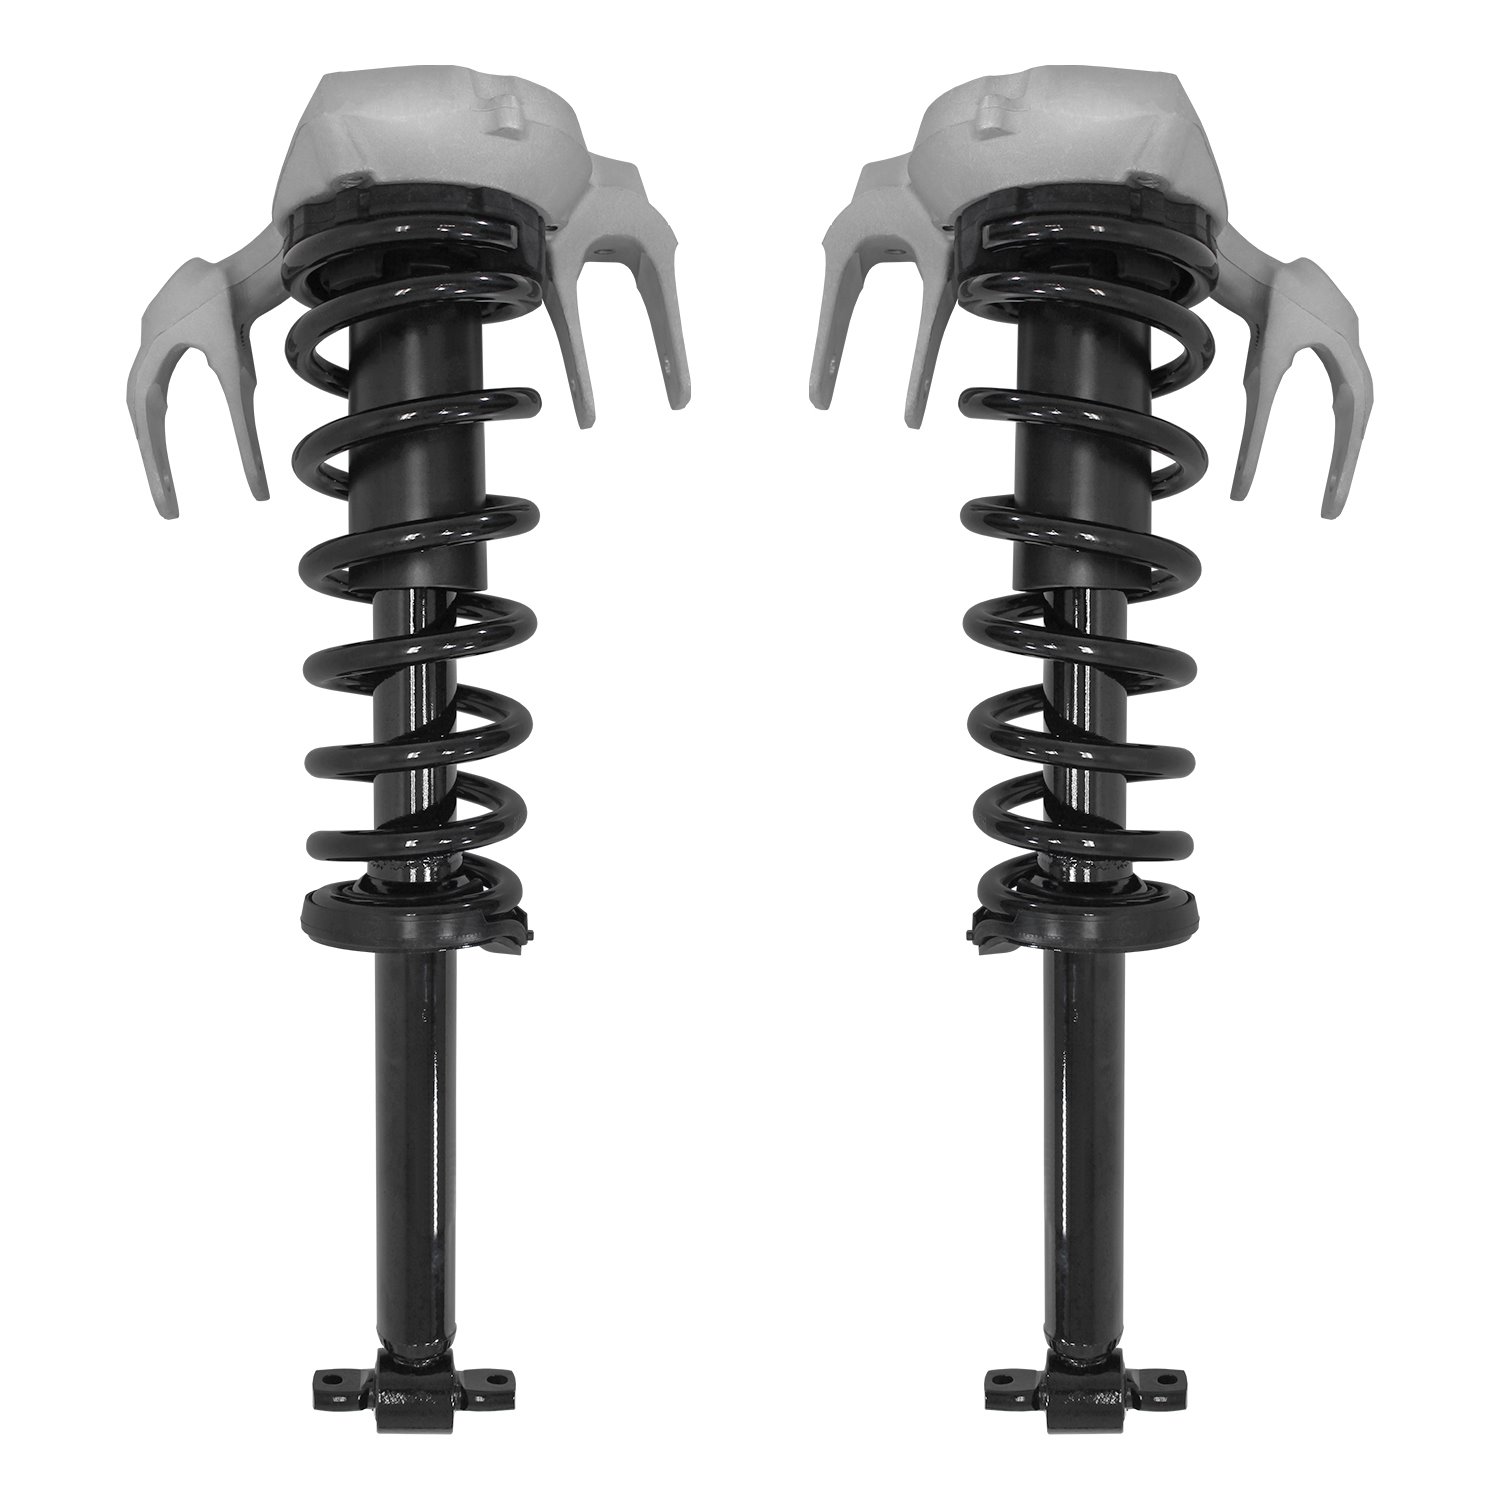 2-11703-11704-001 Suspension Strut & Coil Spring Assembly Set Fits Select Cadillac CTS